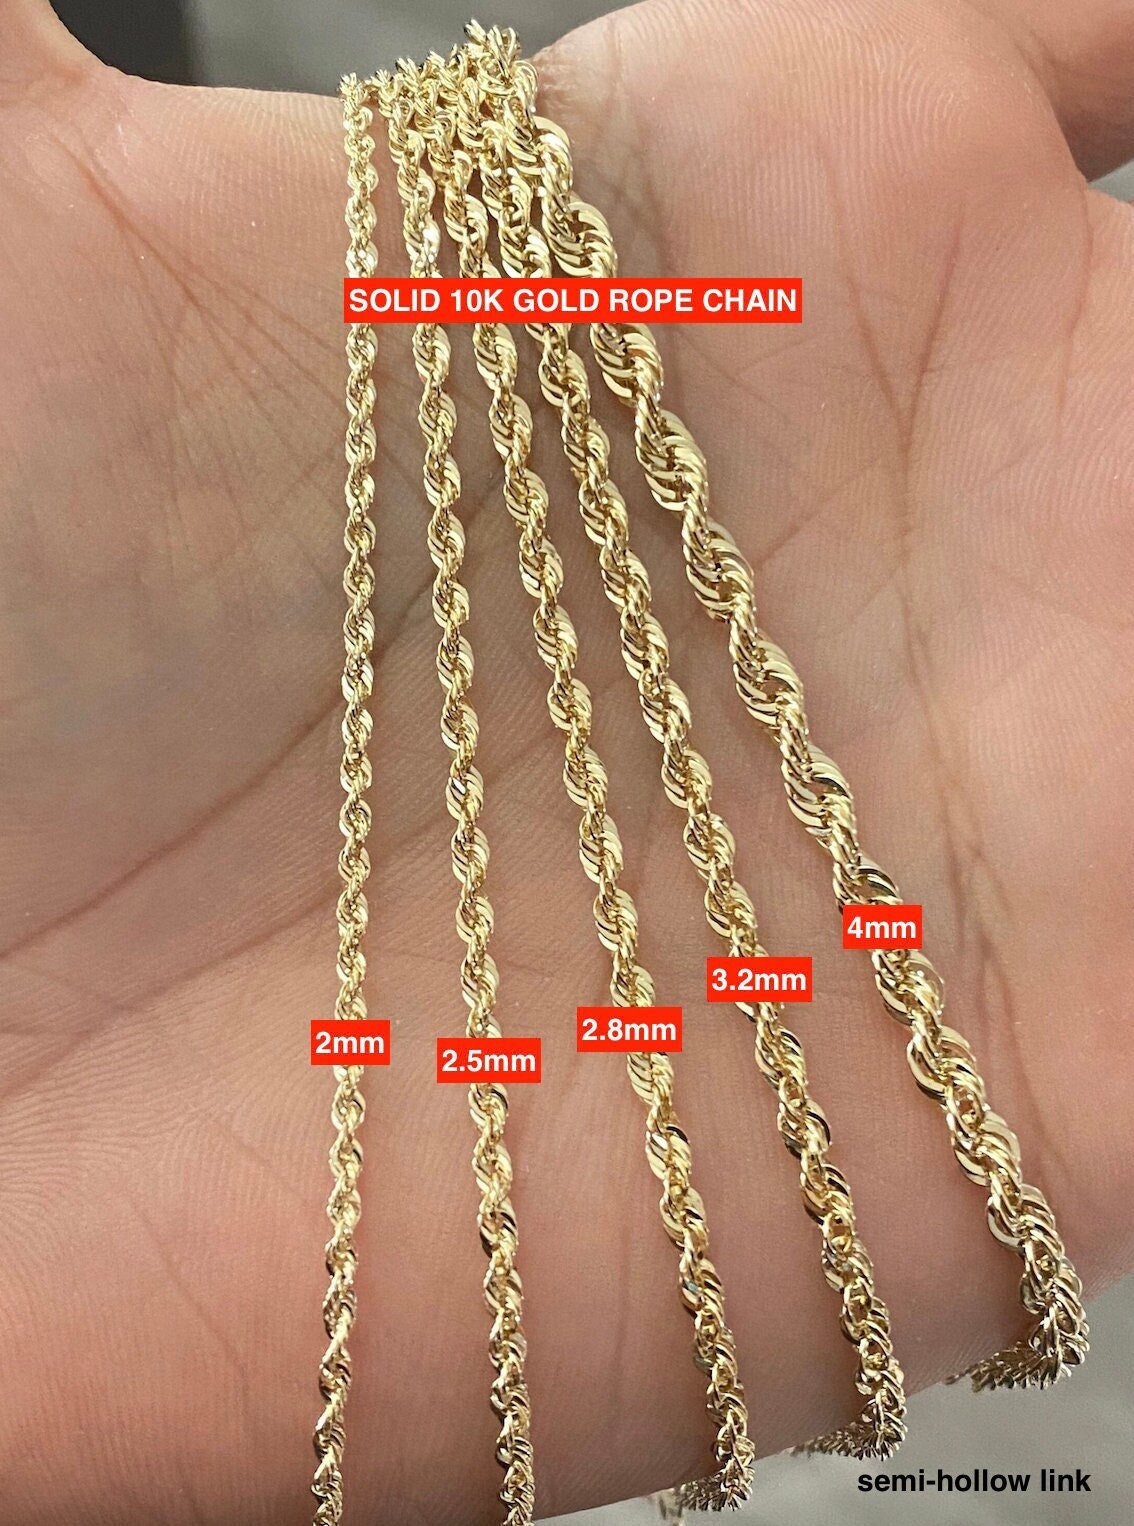 Solid 10K Gold Rope Chain Gold Rope Necklace 1.5mm 2mm 3mm 16in 18inch 20, 10K Gold Rope Chain, 10K Rope Chain, diamond-cut, Men, Woman